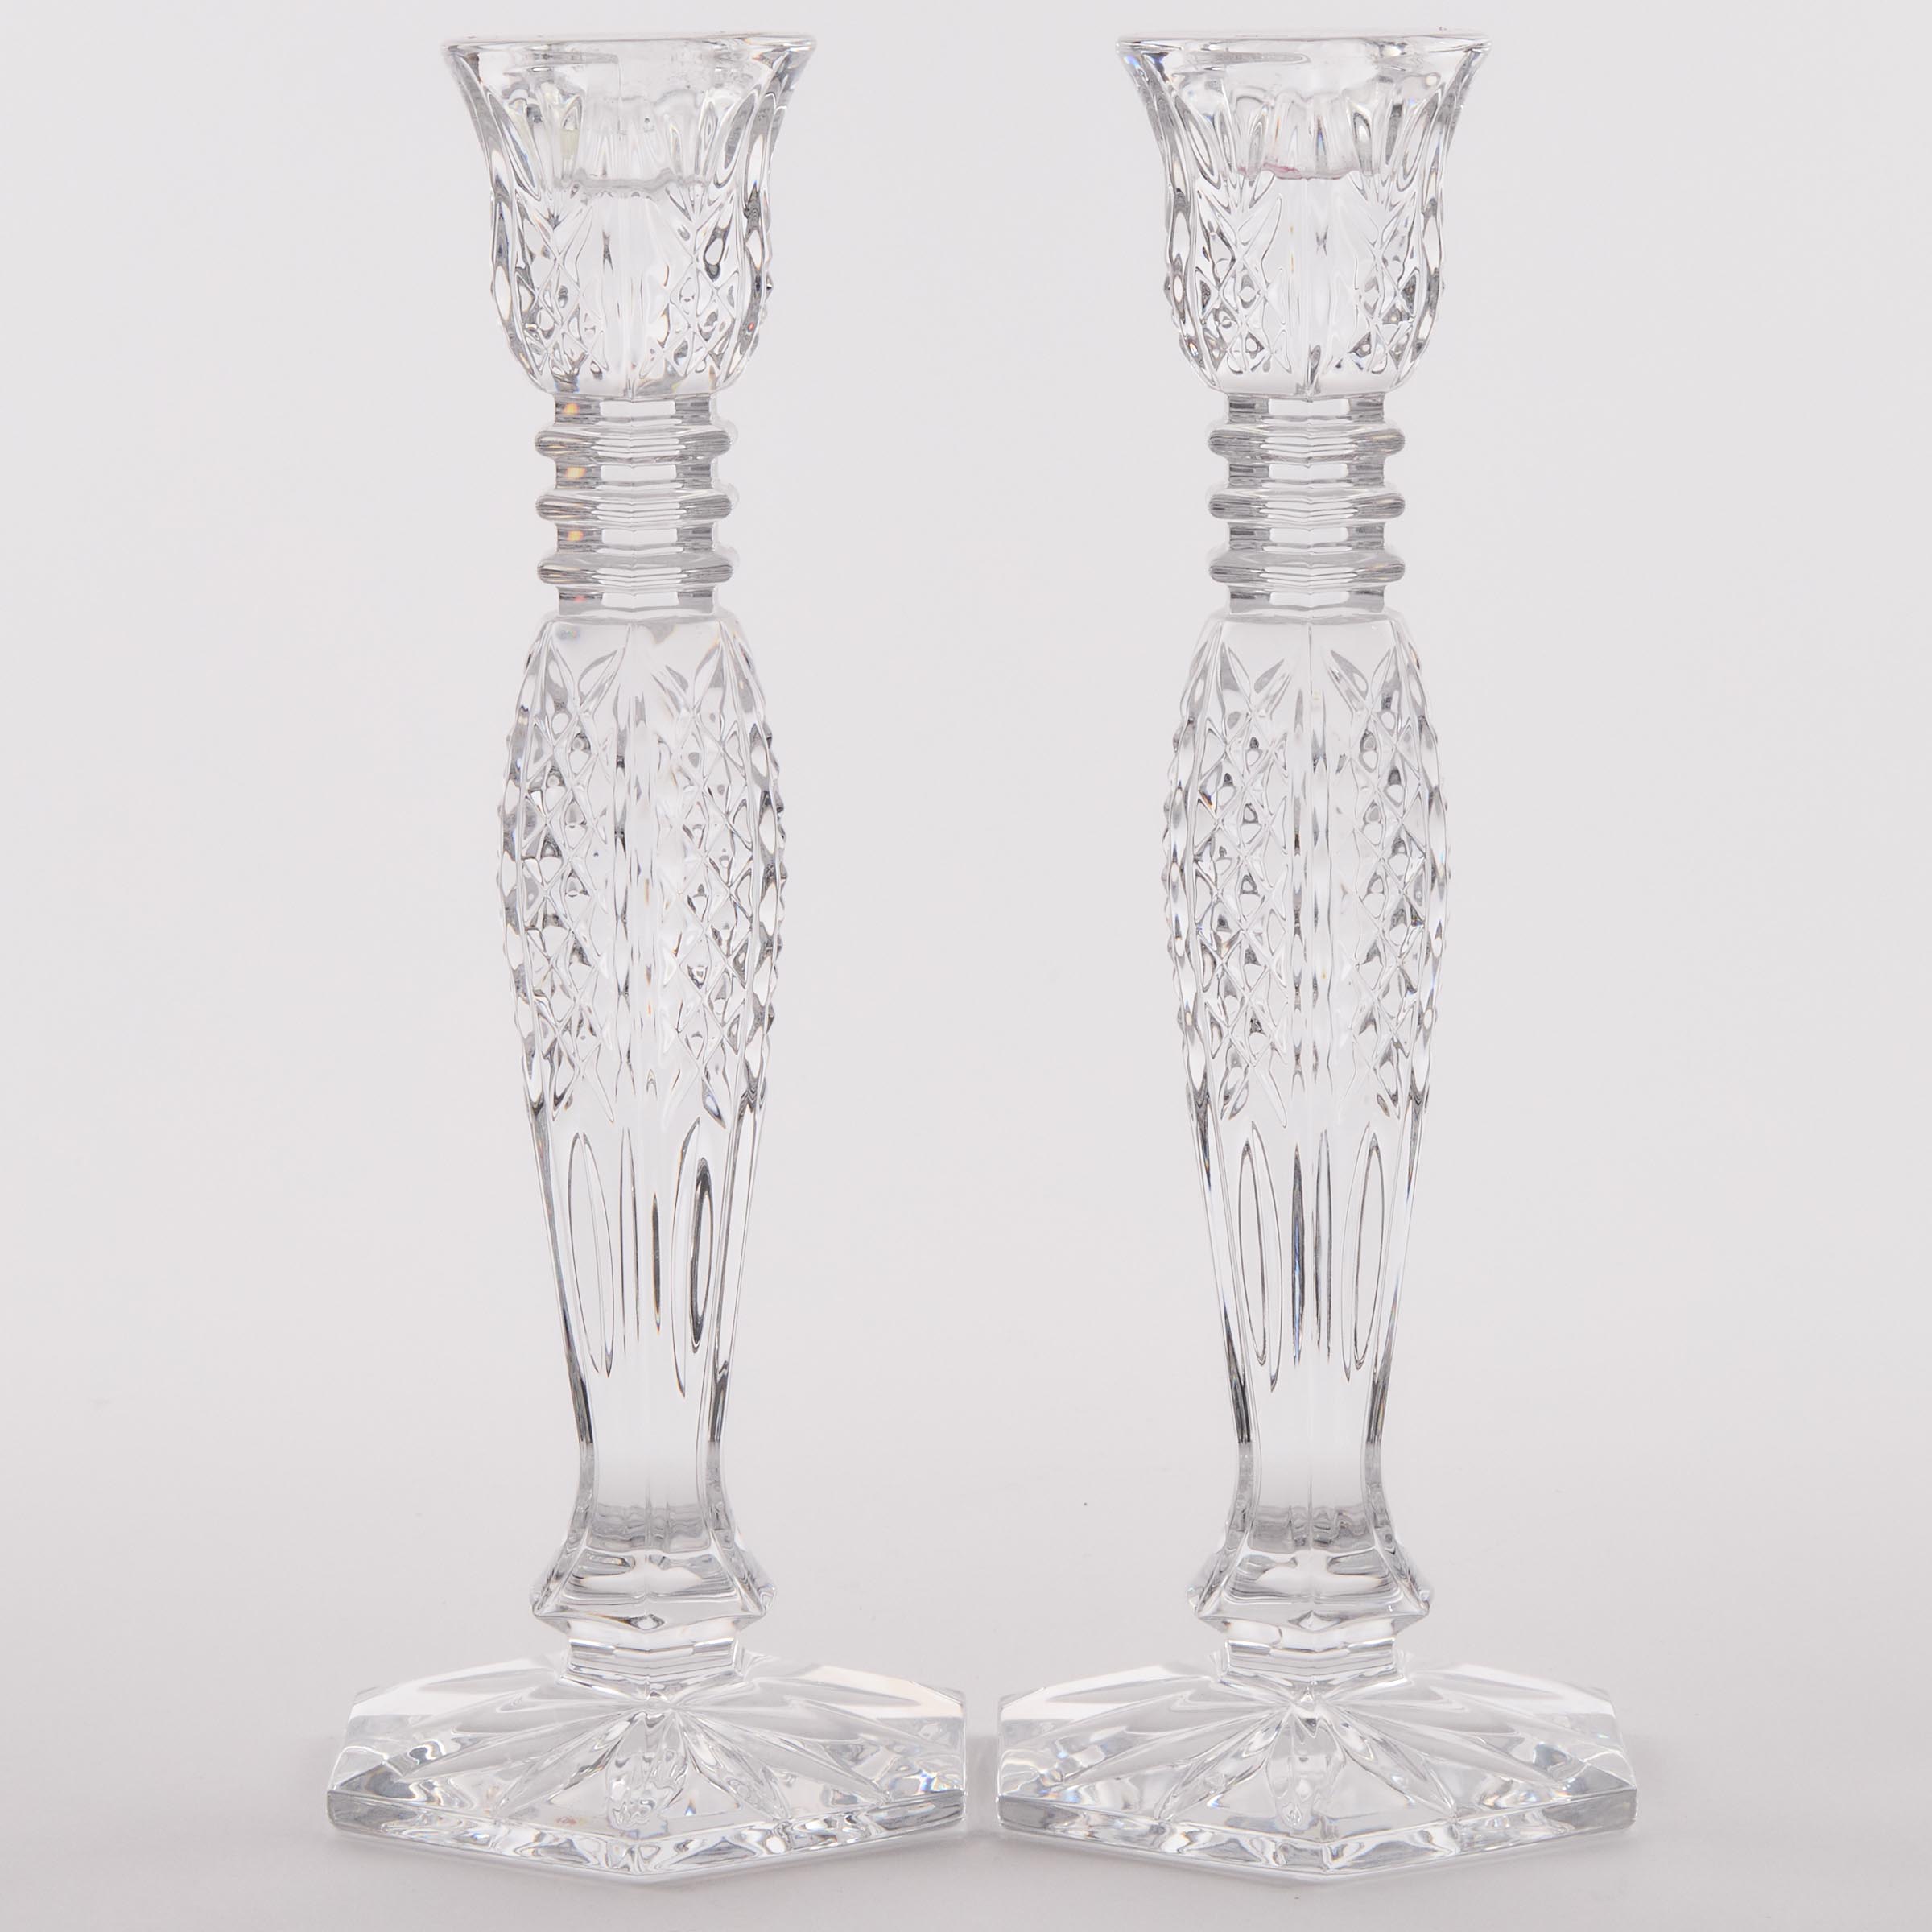 Pair of Waterford Cut Glass Candlesticks,